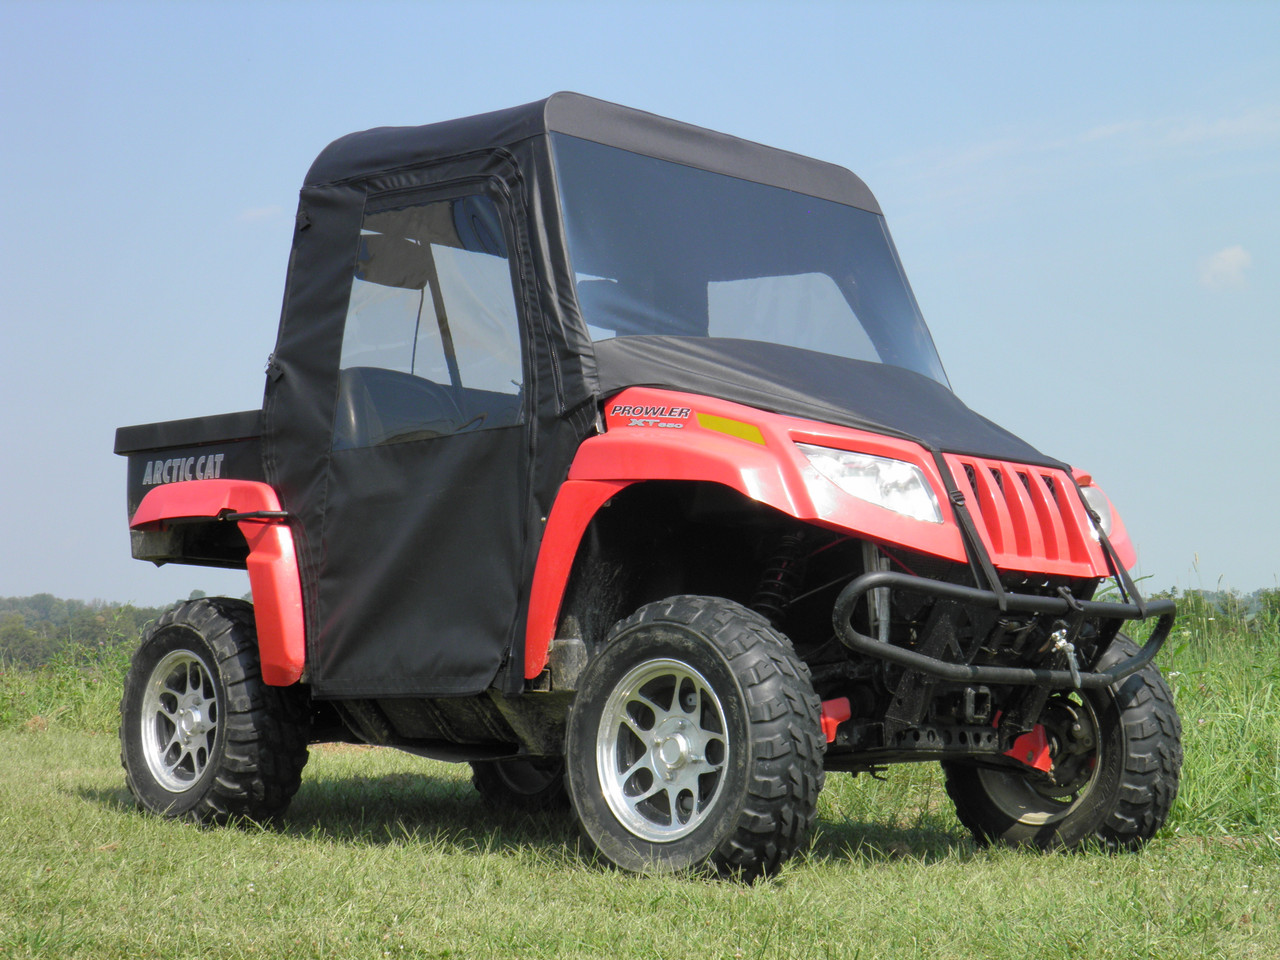 Full cab enclosure with vinyl windshield front and side views